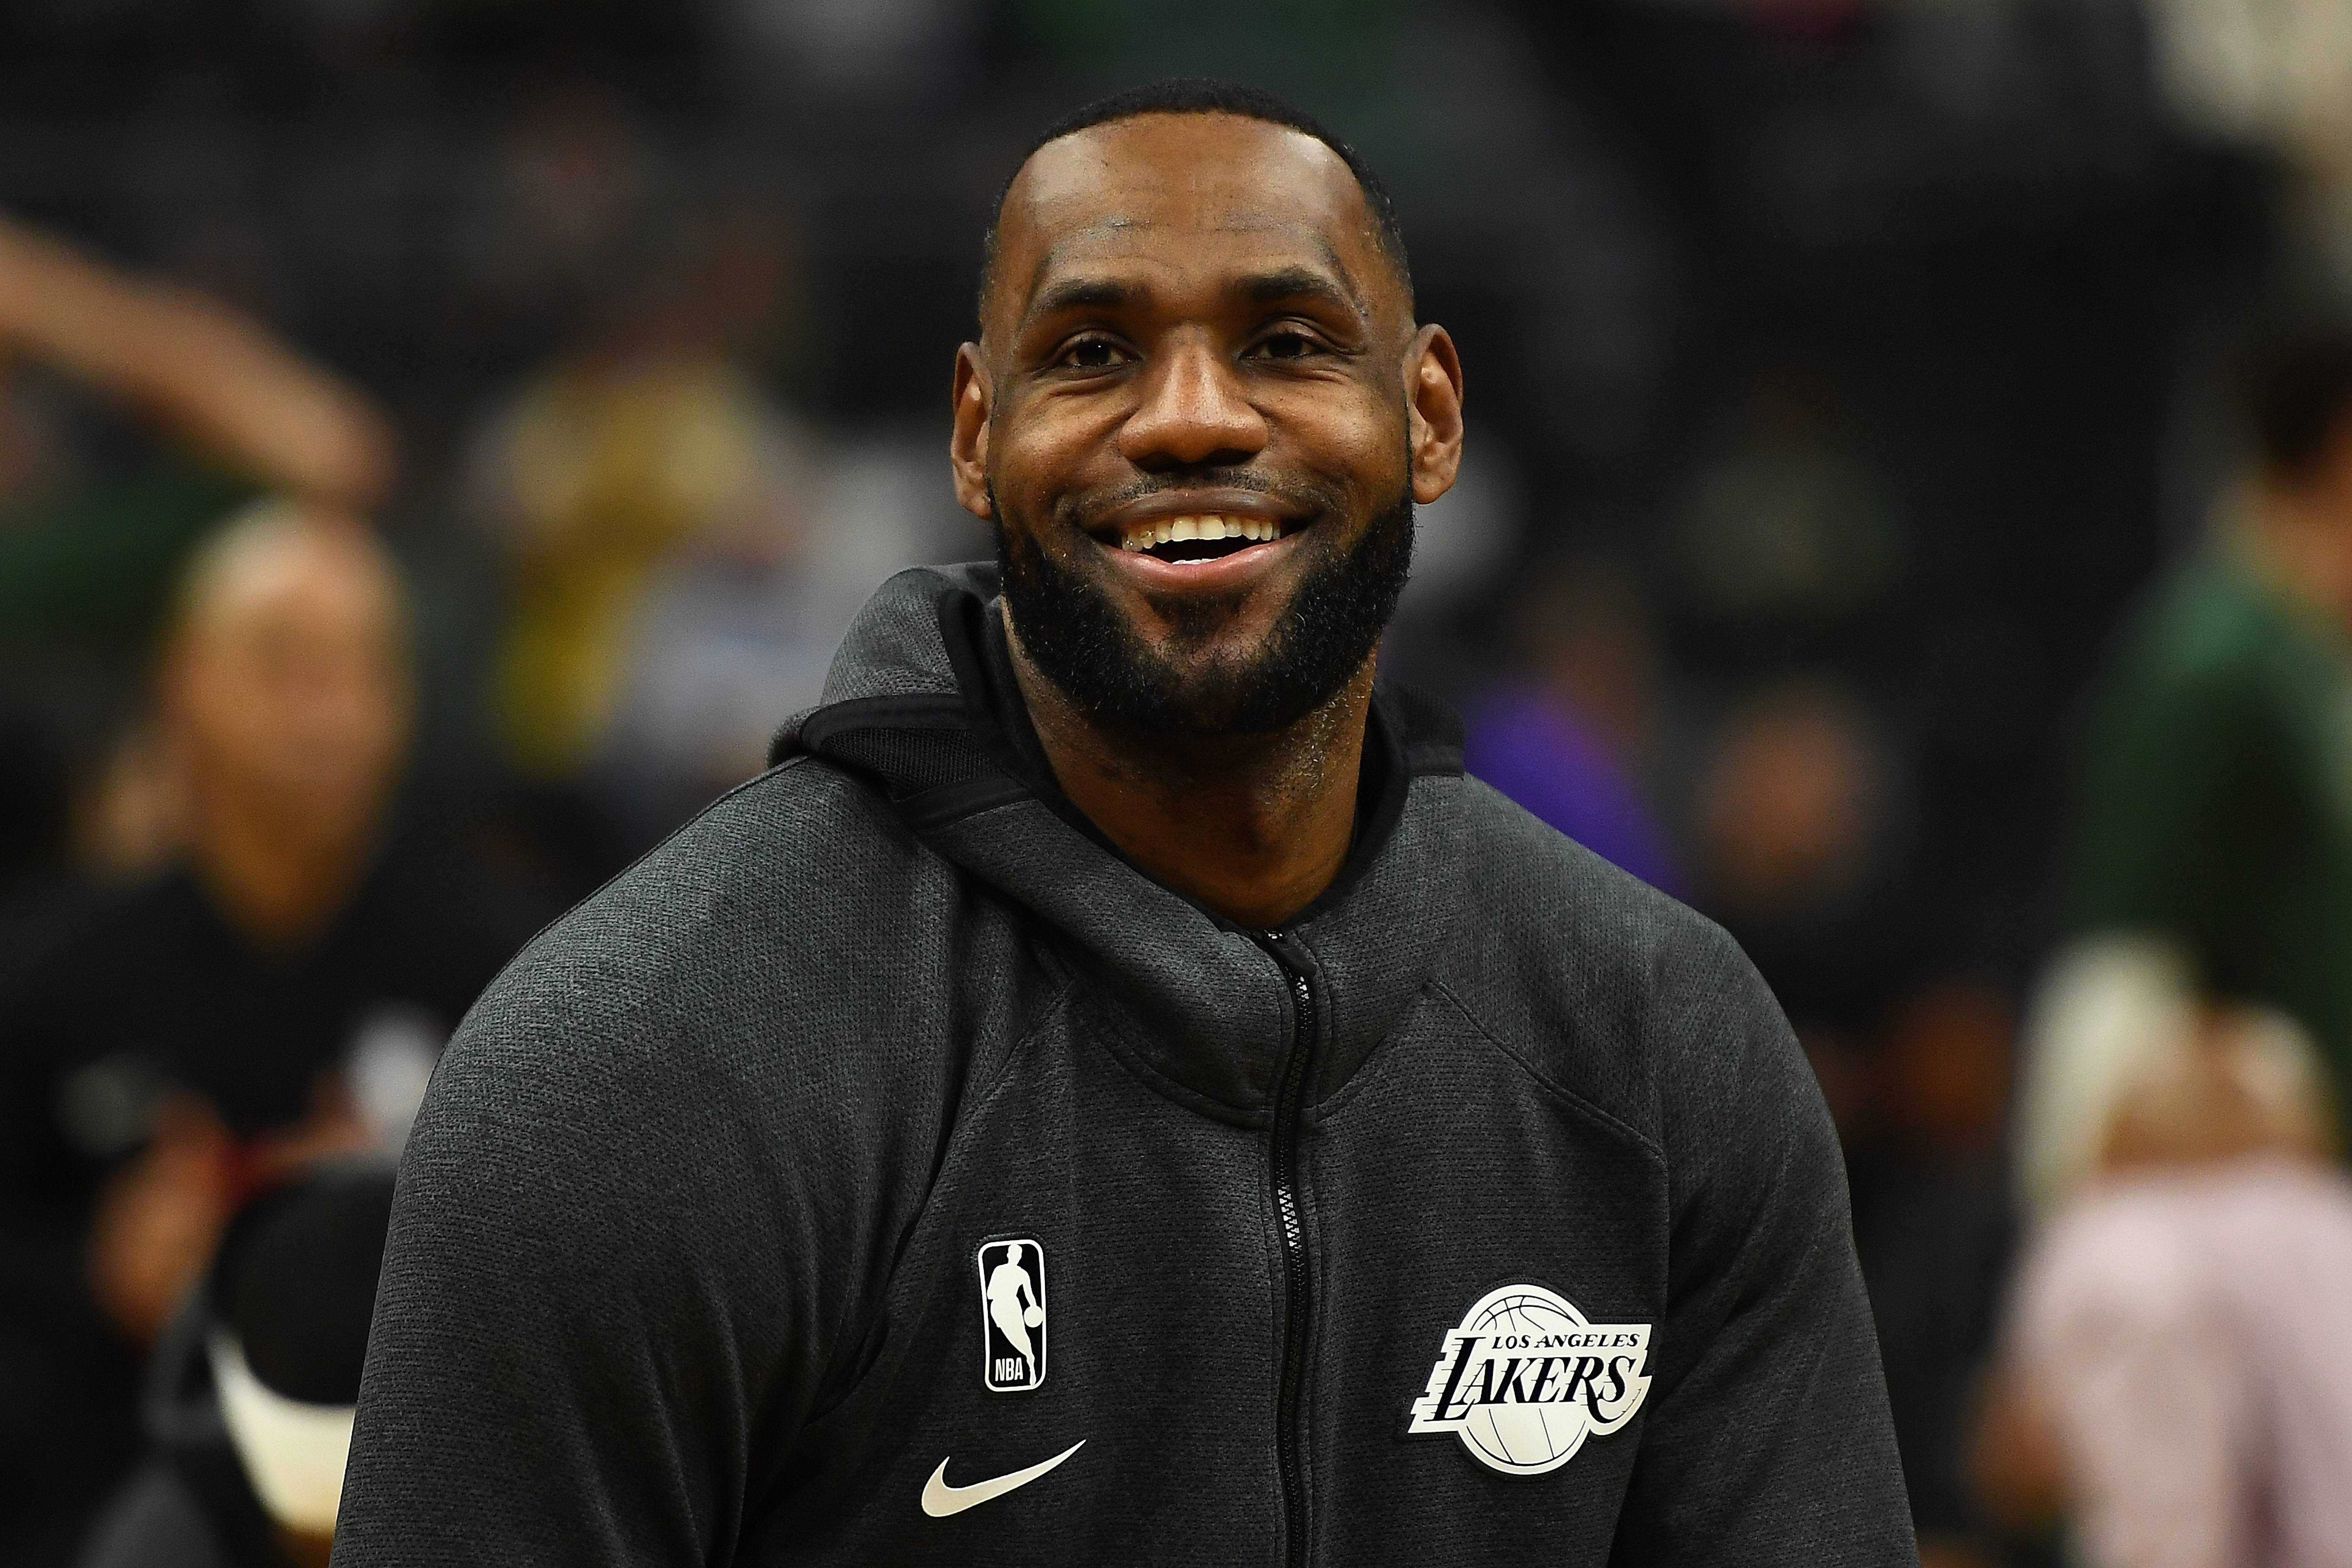 MILWAUKEE, WISCONSIN - DECEMBER 19:  LeBron James #23 of the Los Angeles Lakers participates in warmups prior to a game prior to a game against the Milwaukee Bucks at Fiserv Forum on December 19, 2019 in Milwaukee, Wisconsin. NOTE TO USER: User expressly acknowledges and agrees that, by downloading and or using this photograph, User is consenting to the terms and conditions of the Getty Images License Agreement. (Photo by Stacy Revere/Getty Images)